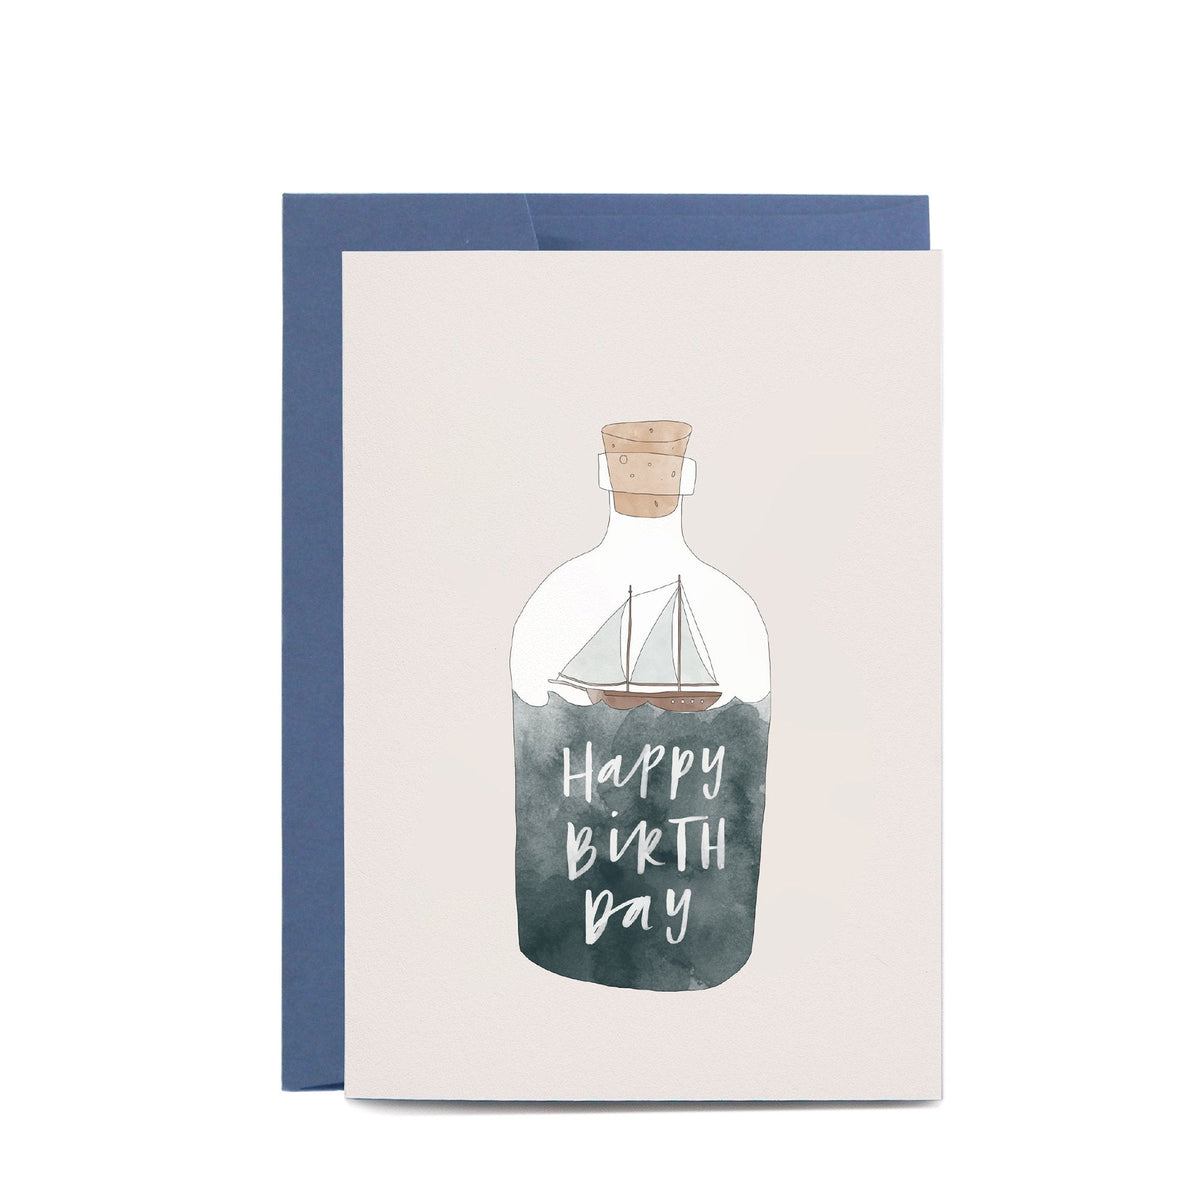 In the Daylight - Card - Birthday - Ship In a Bottle